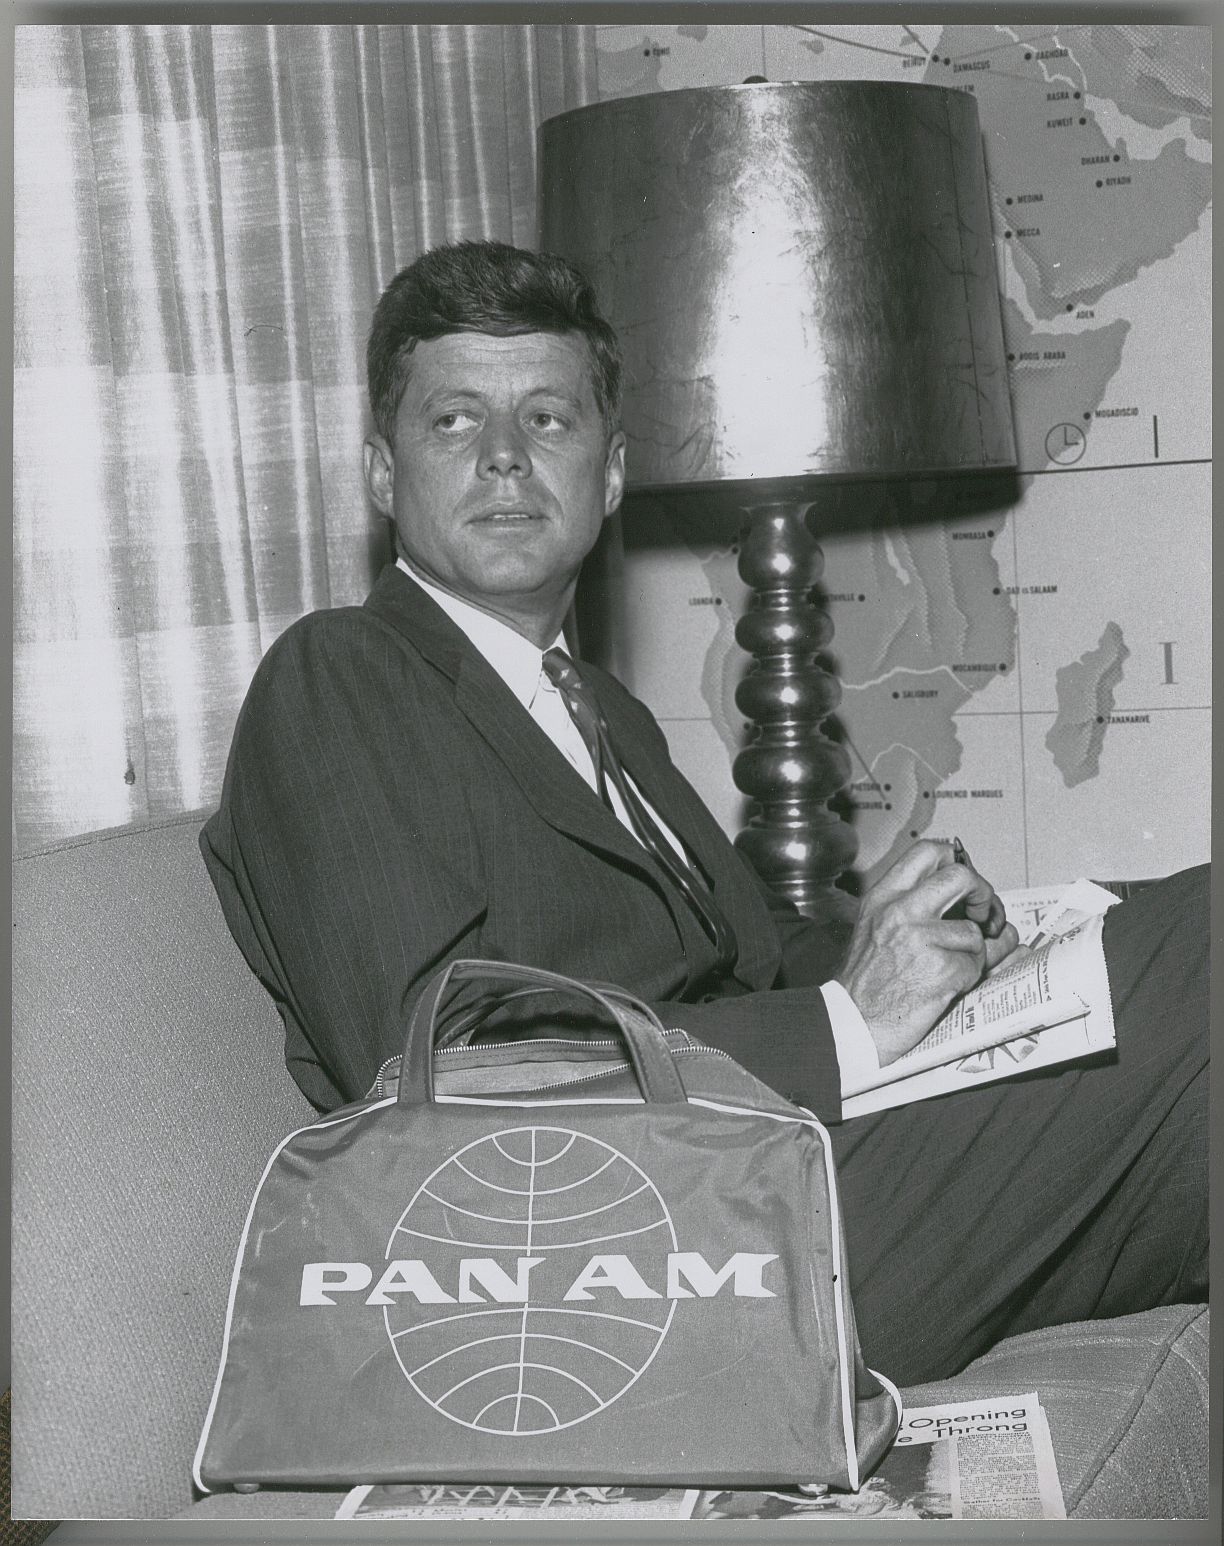 1959 Senator John F. Kennedy relaxes in a Pan Am Clipper Club prior to his flight.